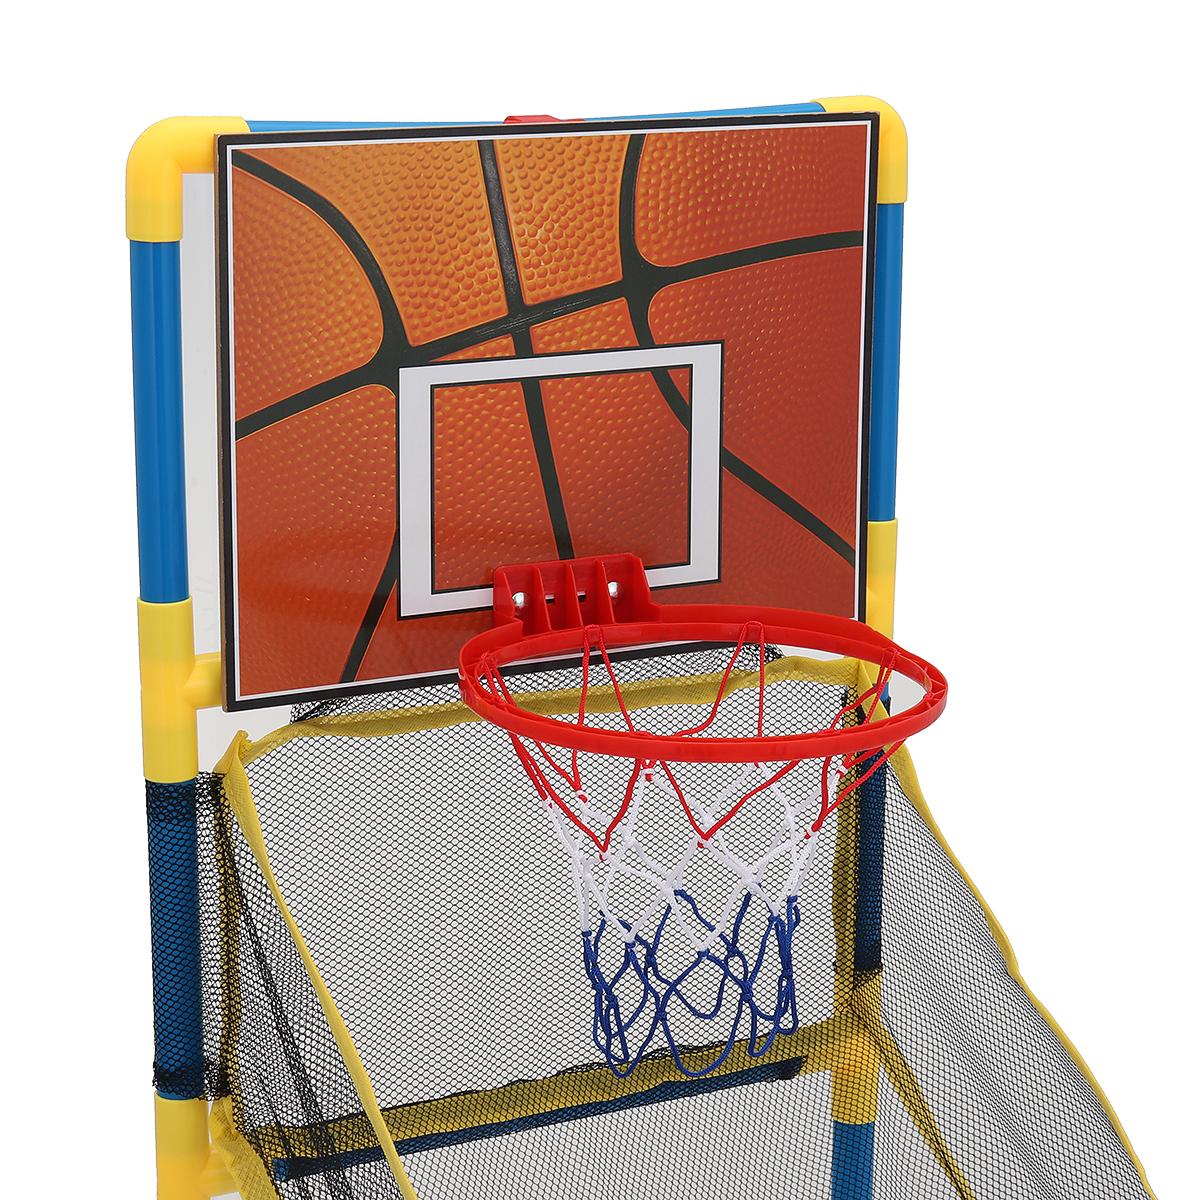 Children-Lightweight-Portable-Easy-Assemble-Basketball-Stand-Adjustable-Indoor-Outdoor-Sports-Toys-w-1829730-7